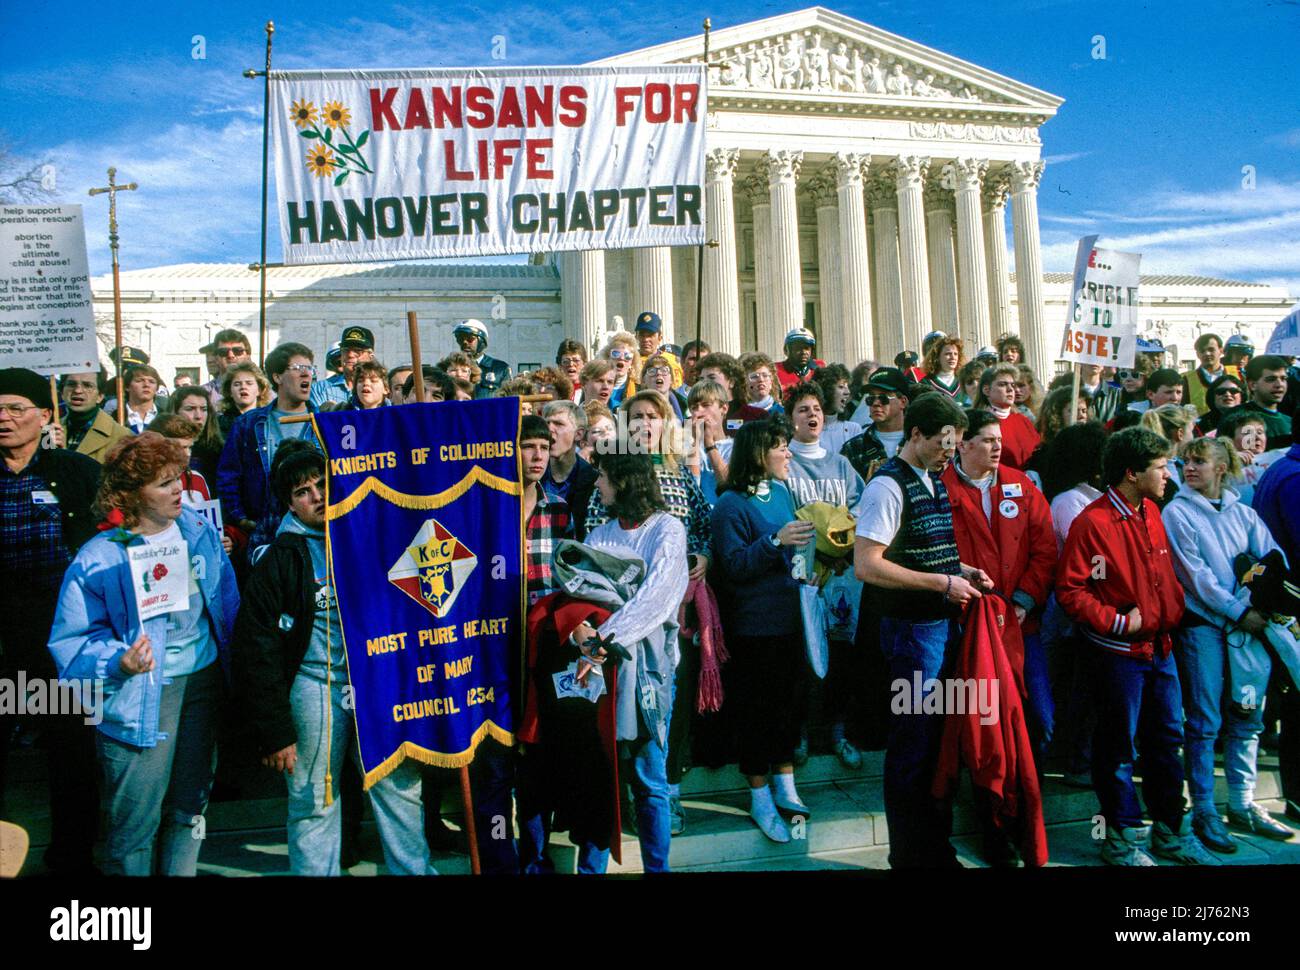 View of anti-abortion demonstrators, many with signs, as they pose in front of the United States Supreme Court Building during the annual March for Life, Washington DC, January 22, 1989. Among the visible signs is a banner that reads 'Kansans for Life.' (Photo by Mark Reinstein/Corbis via Getty Images) Stock Photo